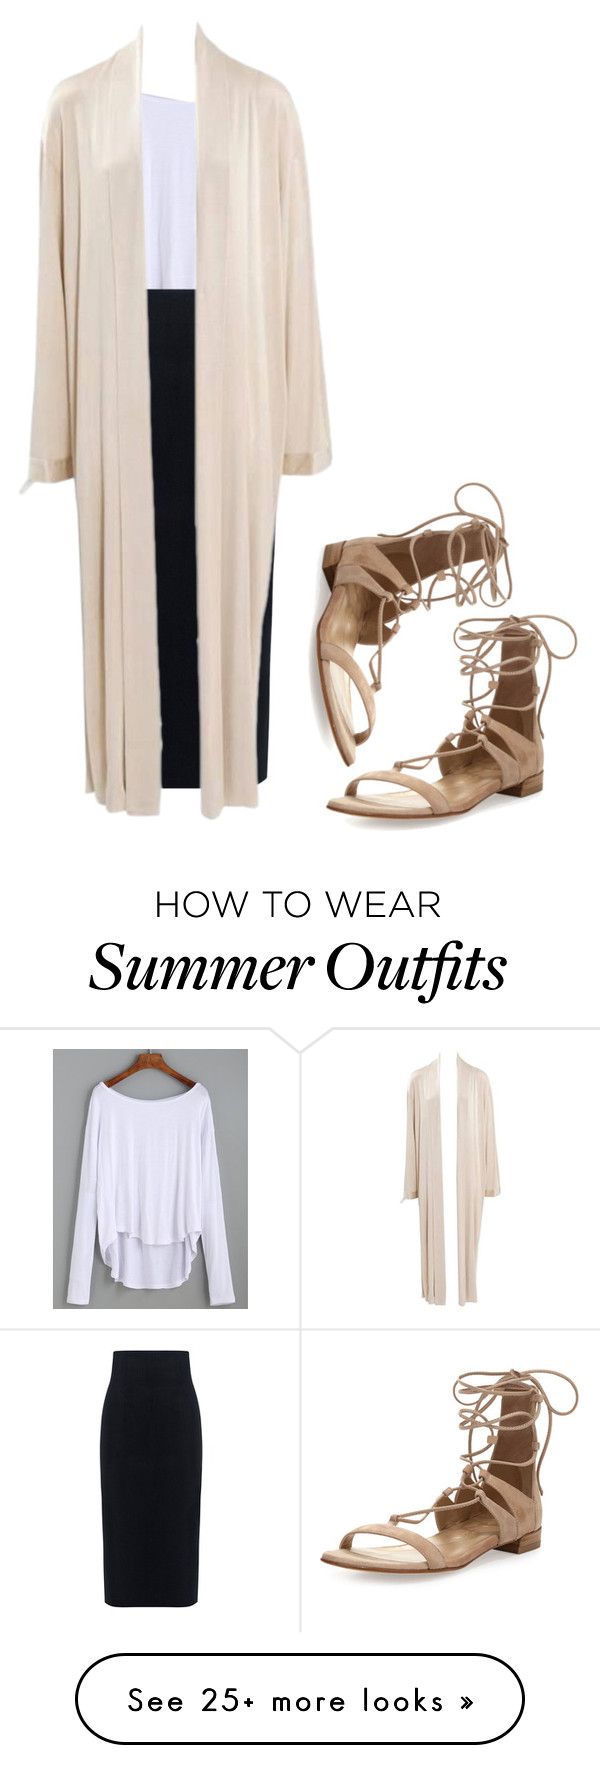 "Beach stroll outfit 1" by iraqbasra on Polyvore featuring Stuart Weit...